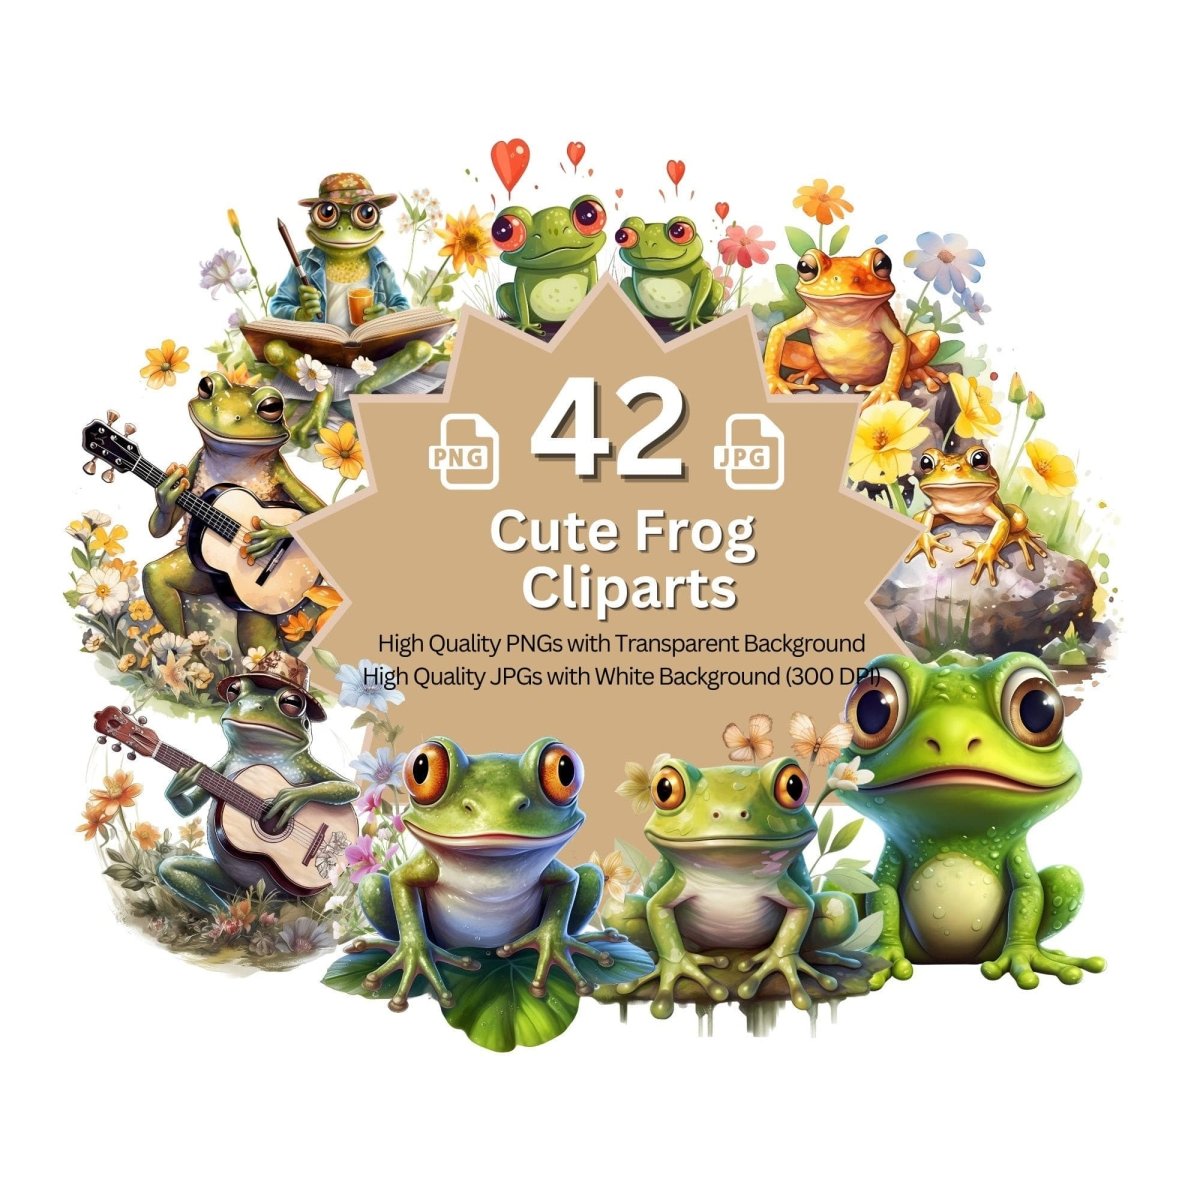 Cute Frogs Megabundle 42+42 High Quality PNGs Frog in different Scenes Clipart - Everything Pixel